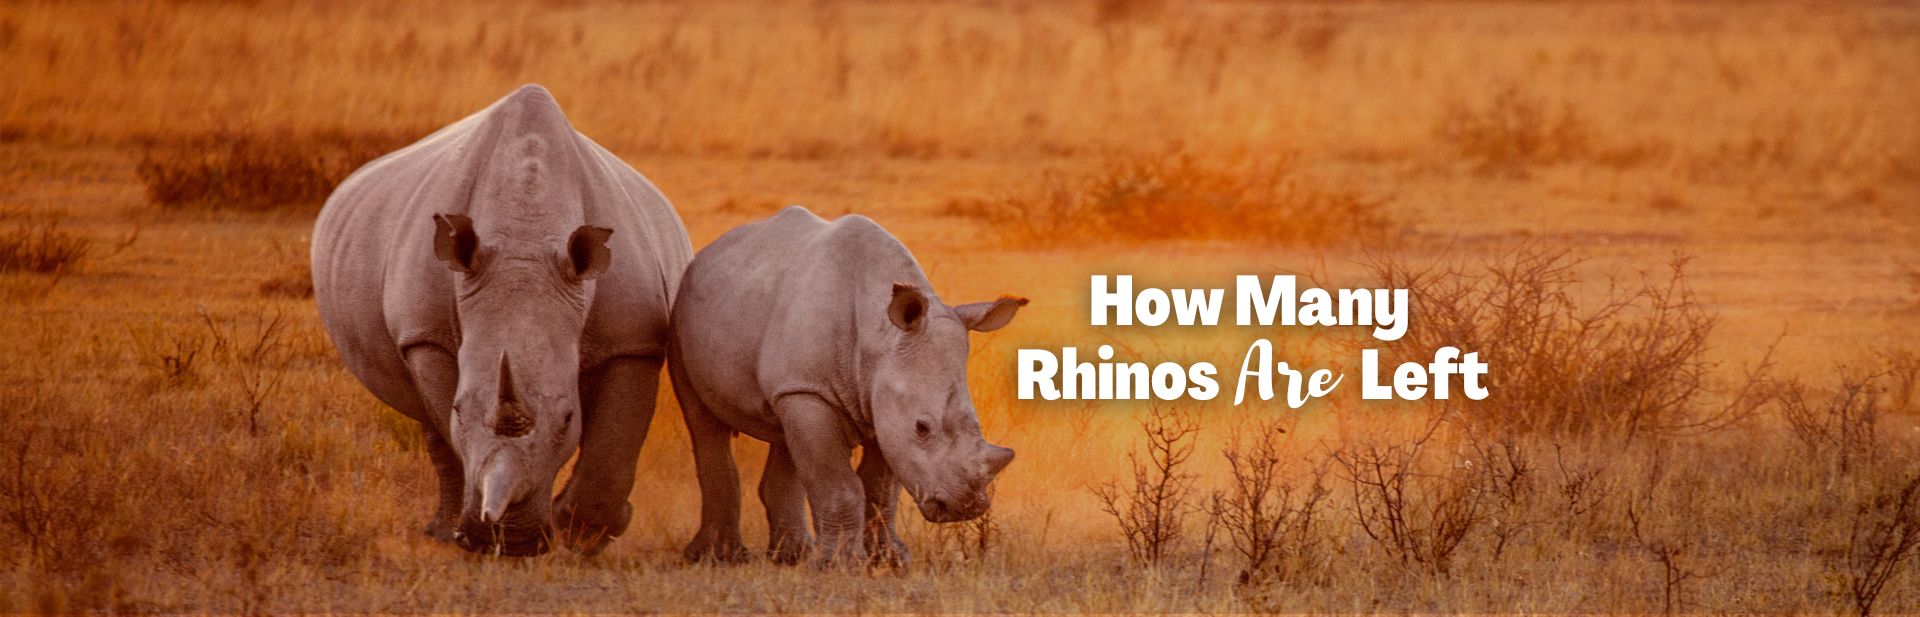 How Many Rhinos Are Left in the World Today?